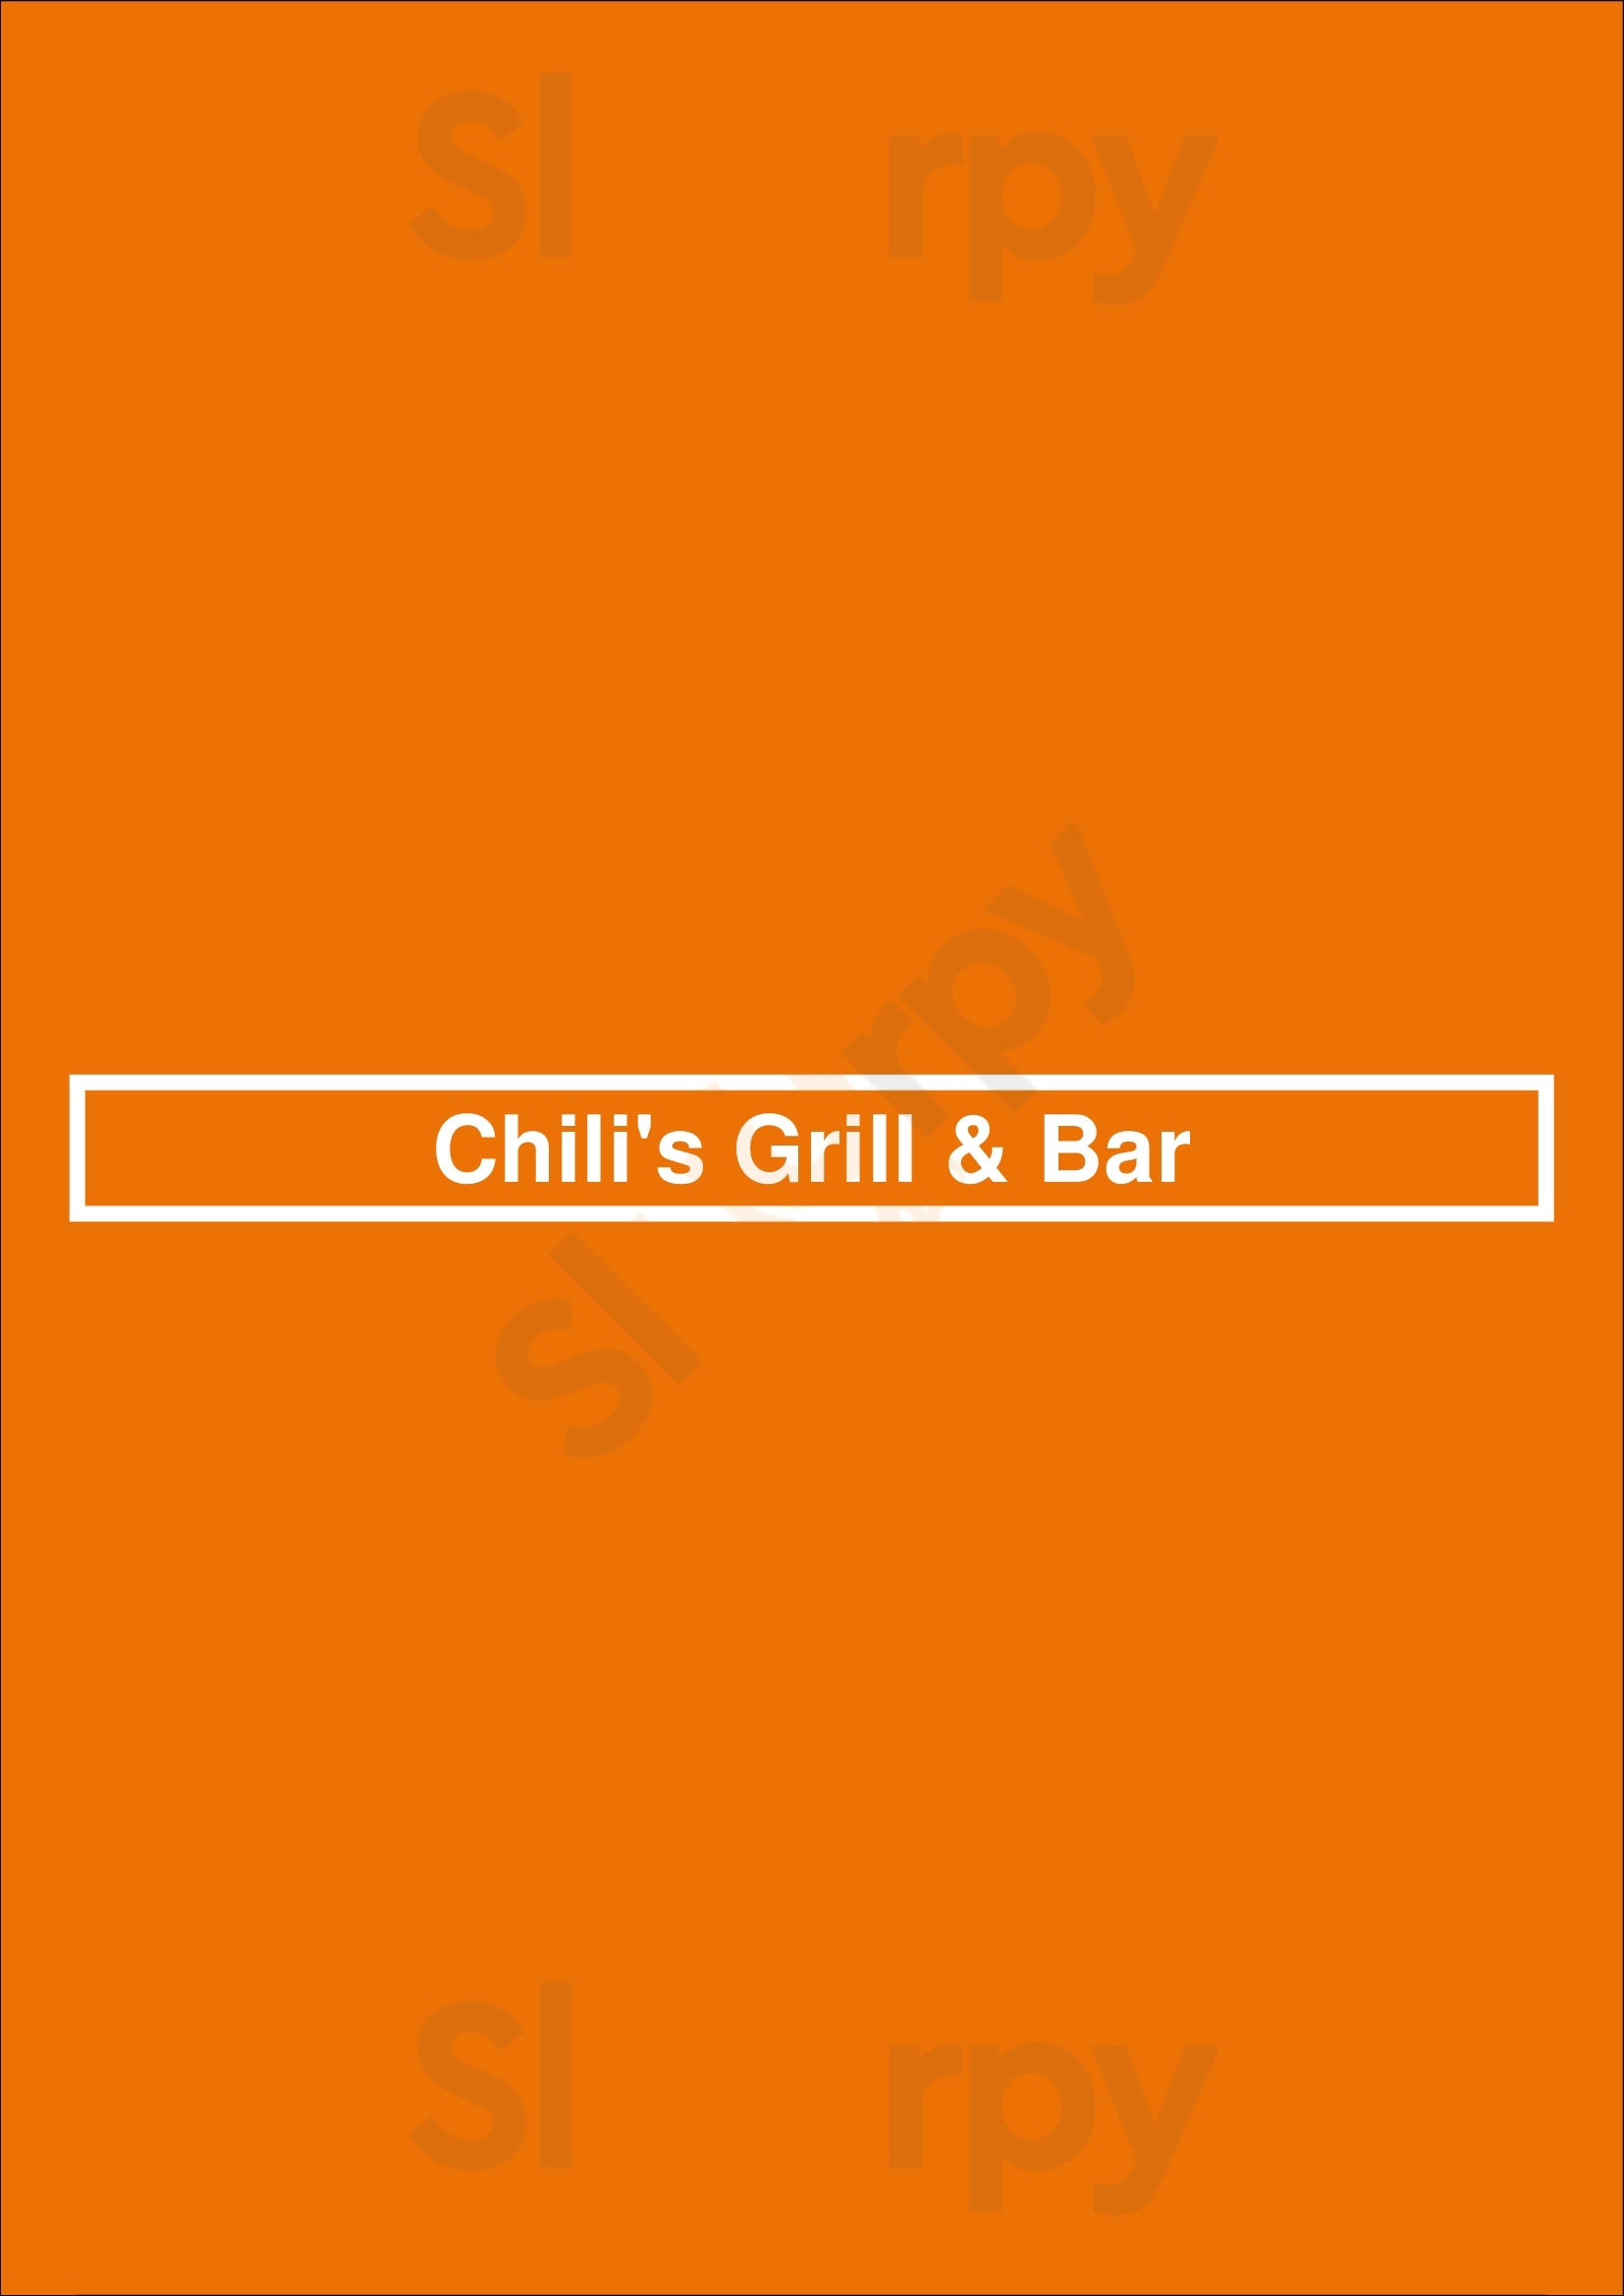 Chili's Grill & Bar Brownsville Menu - 1